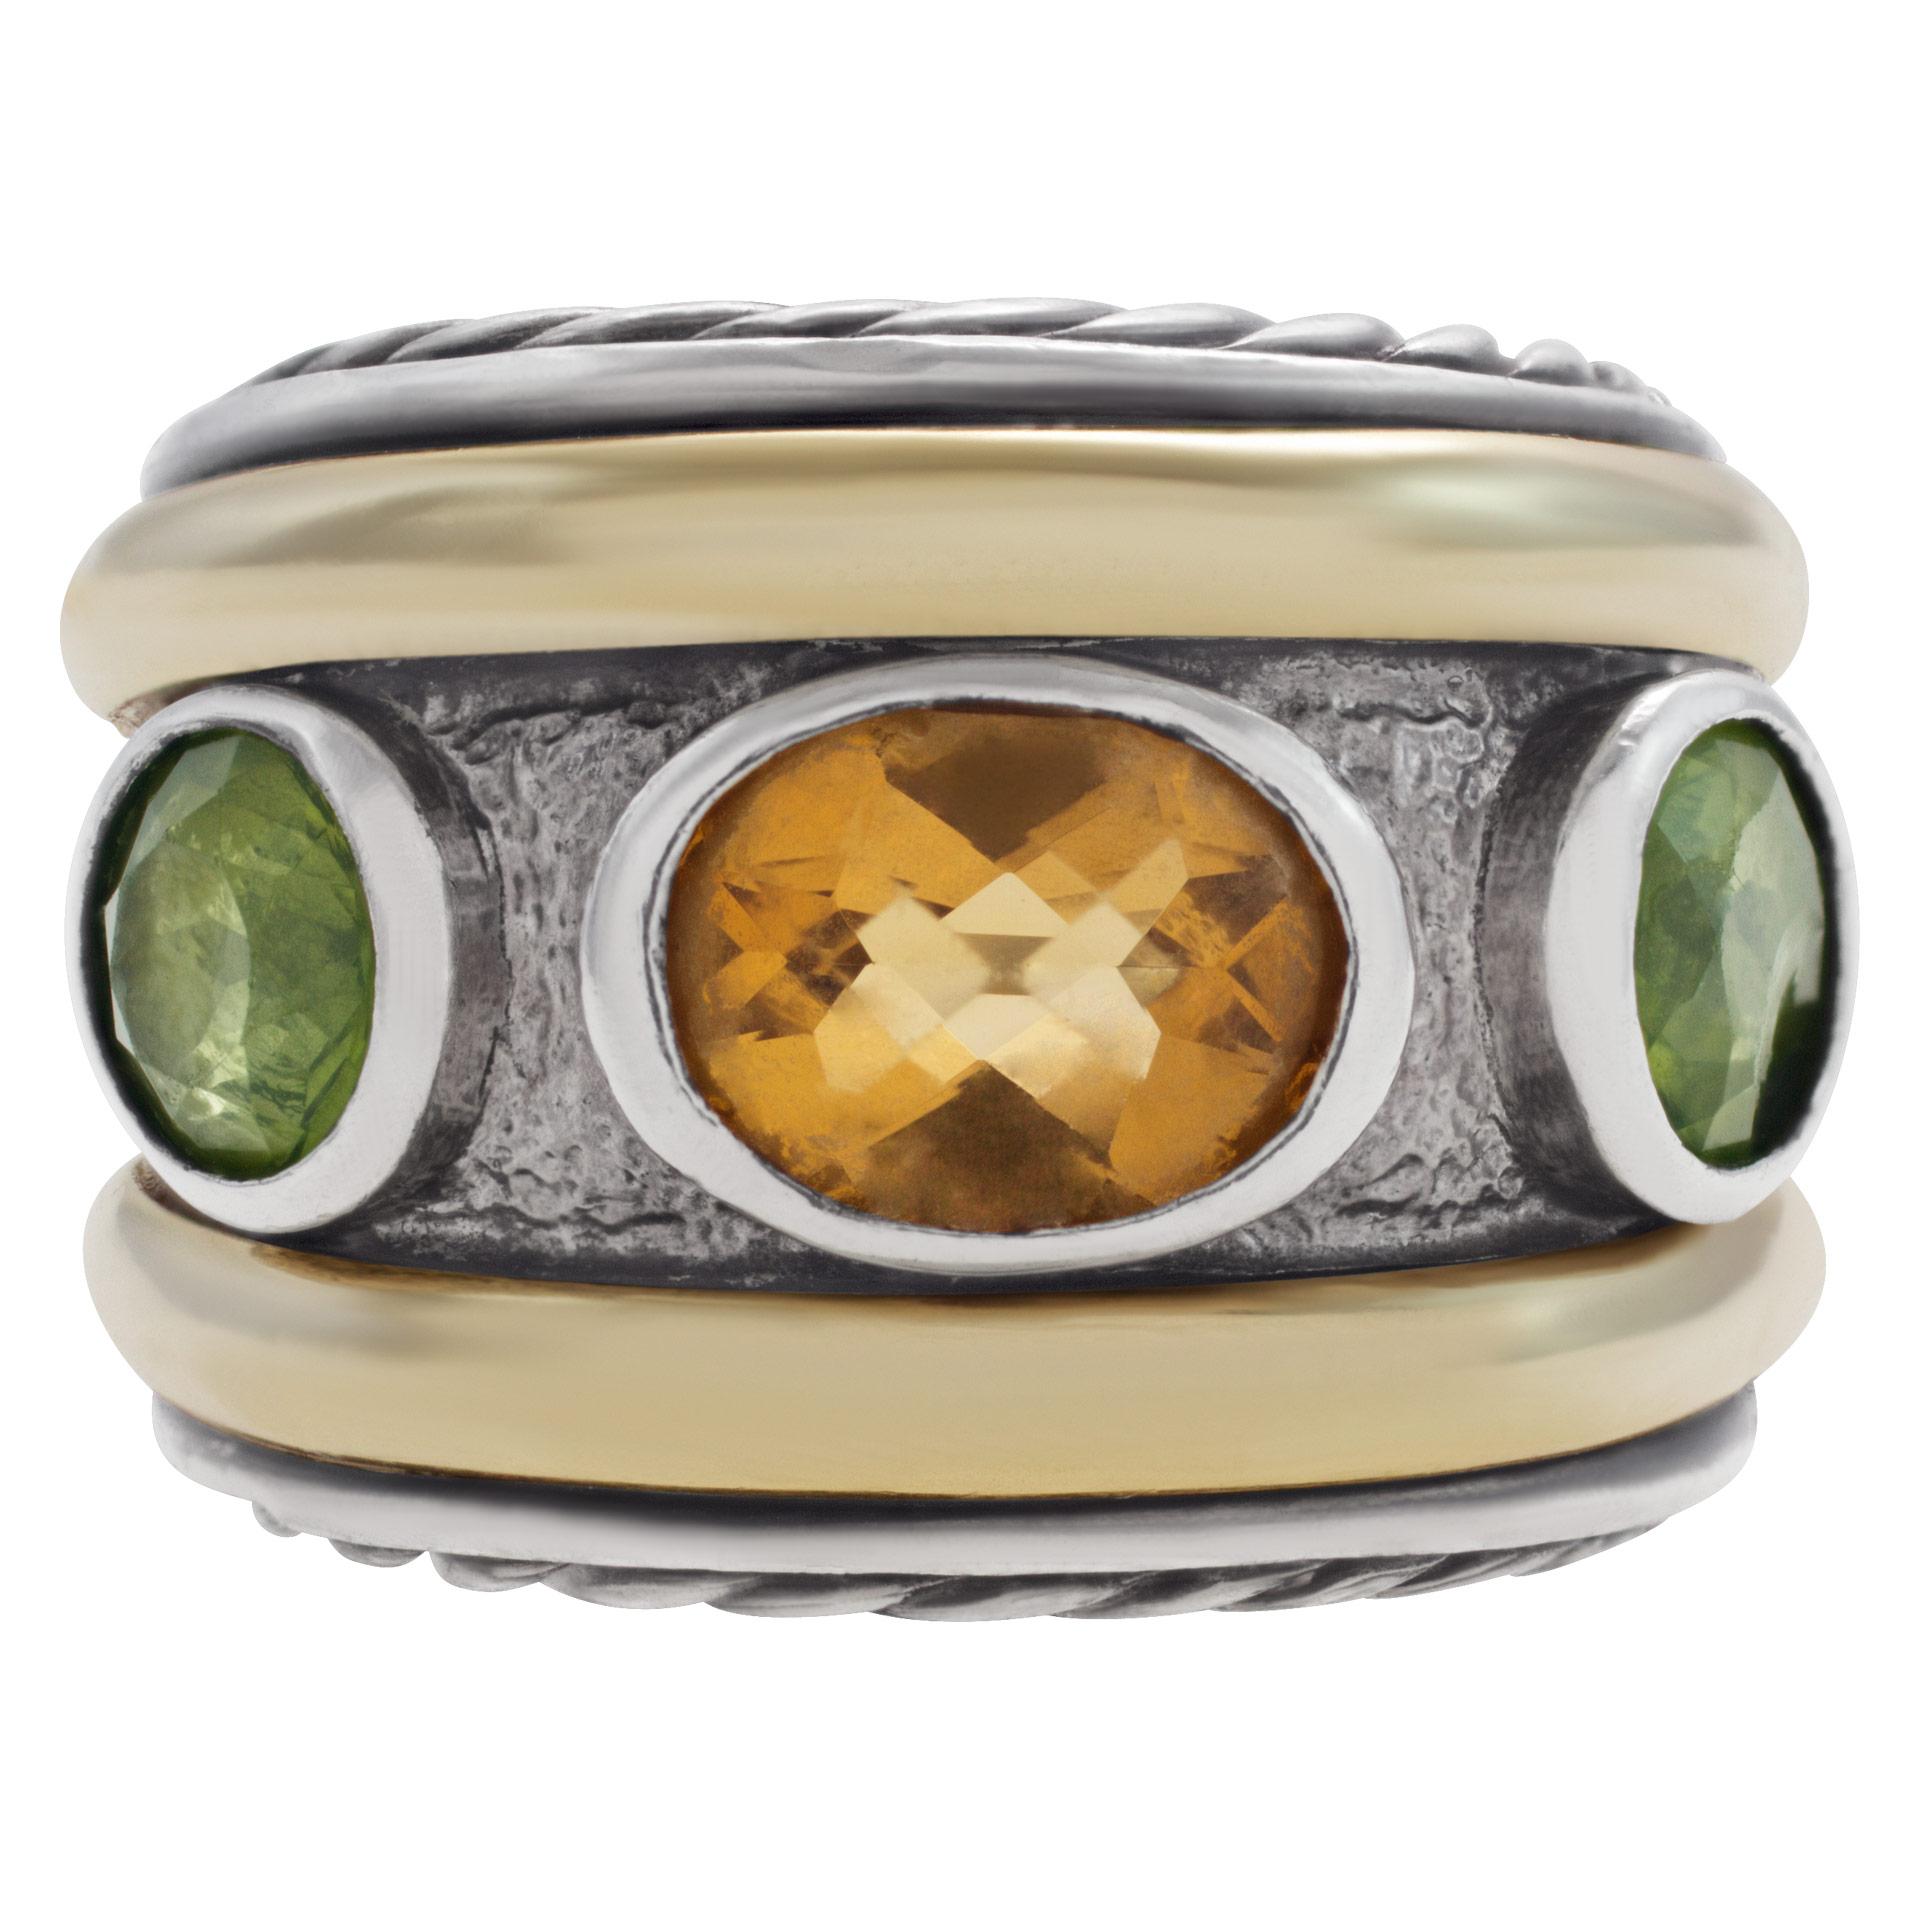 David Yurman Renaissance ring in 14k gold and sterling silver with faceted peridot and citrine. Width at head: 17mm, width at shank: 8.8mm. Size 6.

This David Yurman ring is currently size 6 and some items can be sized up or down, please ask! It